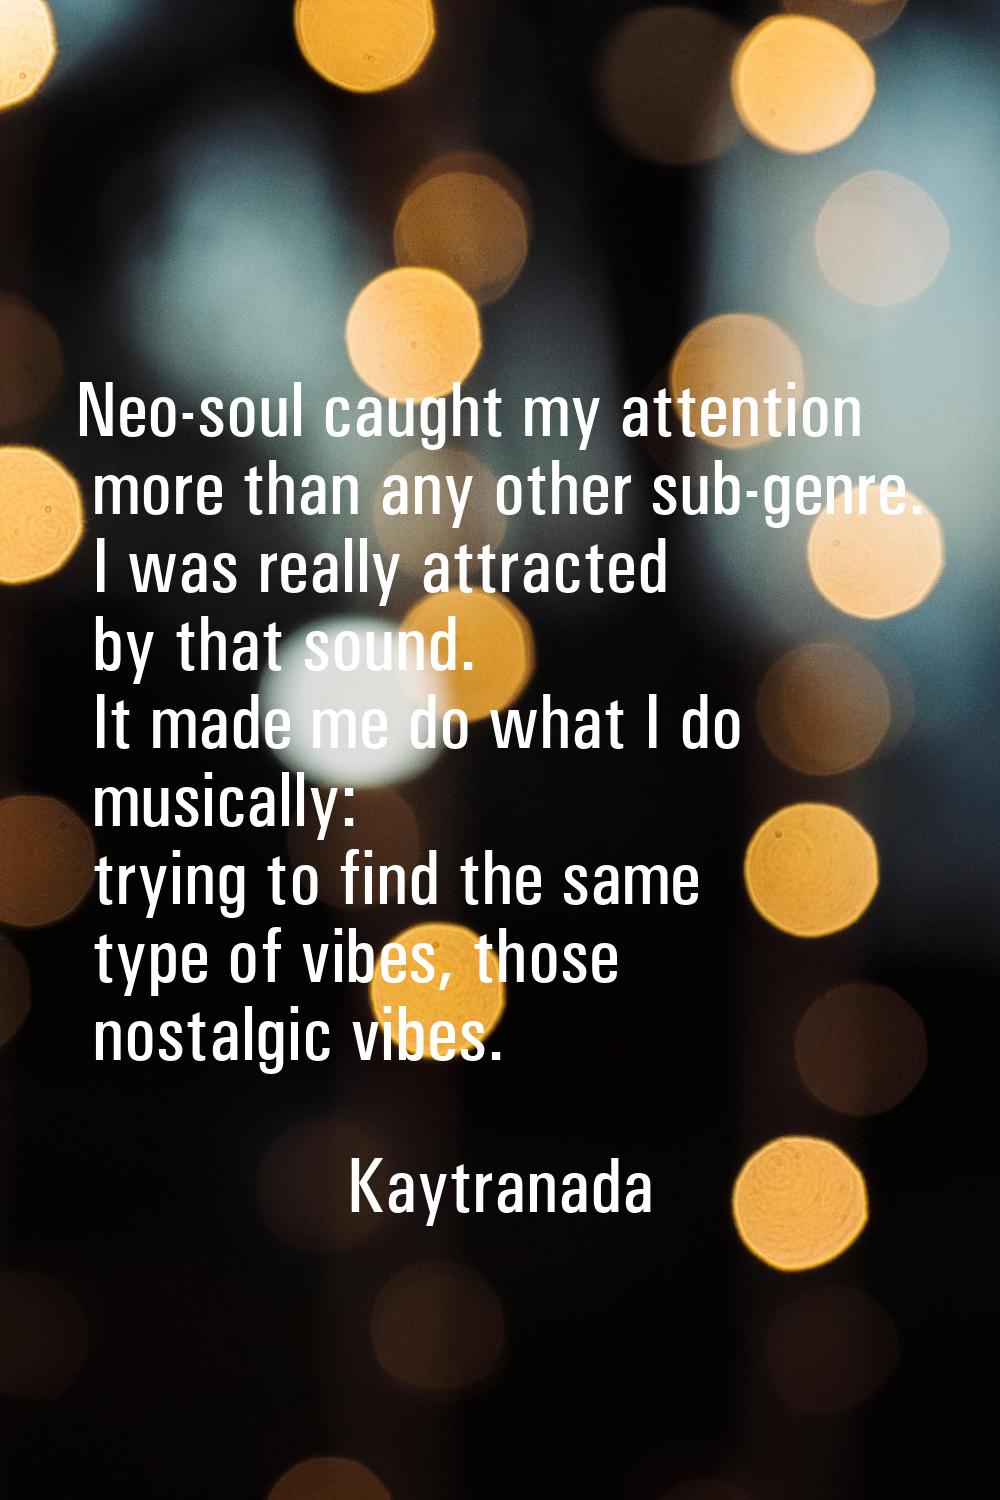 Neo-soul caught my attention more than any other sub-genre. I was really attracted by that sound. I